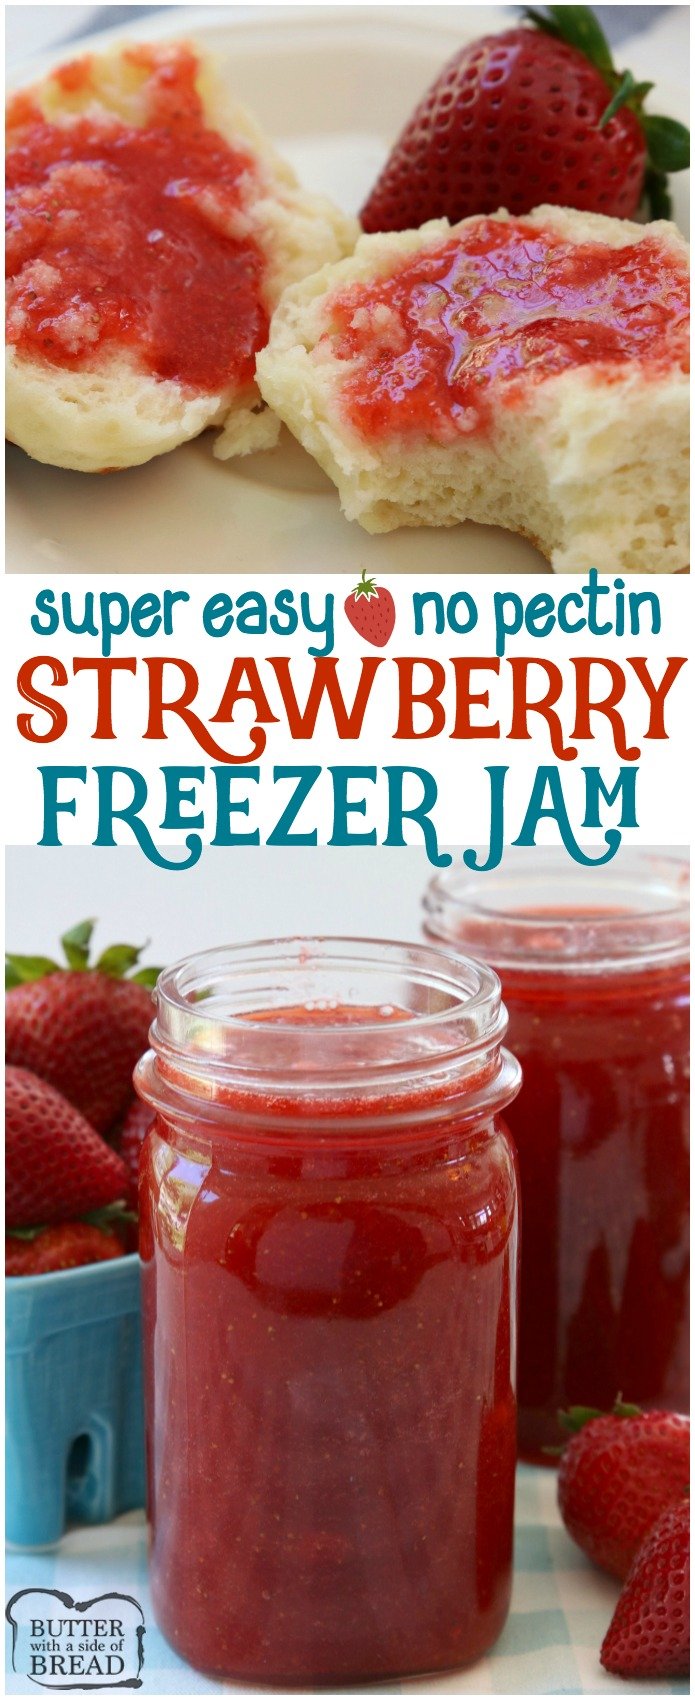 Homemade Strawberry Jam made with just 3 ingredients and NO PECTIN. Making strawberry freezer jam has never been easier or more delicious!  #strawberry #jam #freezerjam #nopectin #strawberries #homemade #delicious #yum #recipe from BUTTER WITH A SIDE OF BREAD